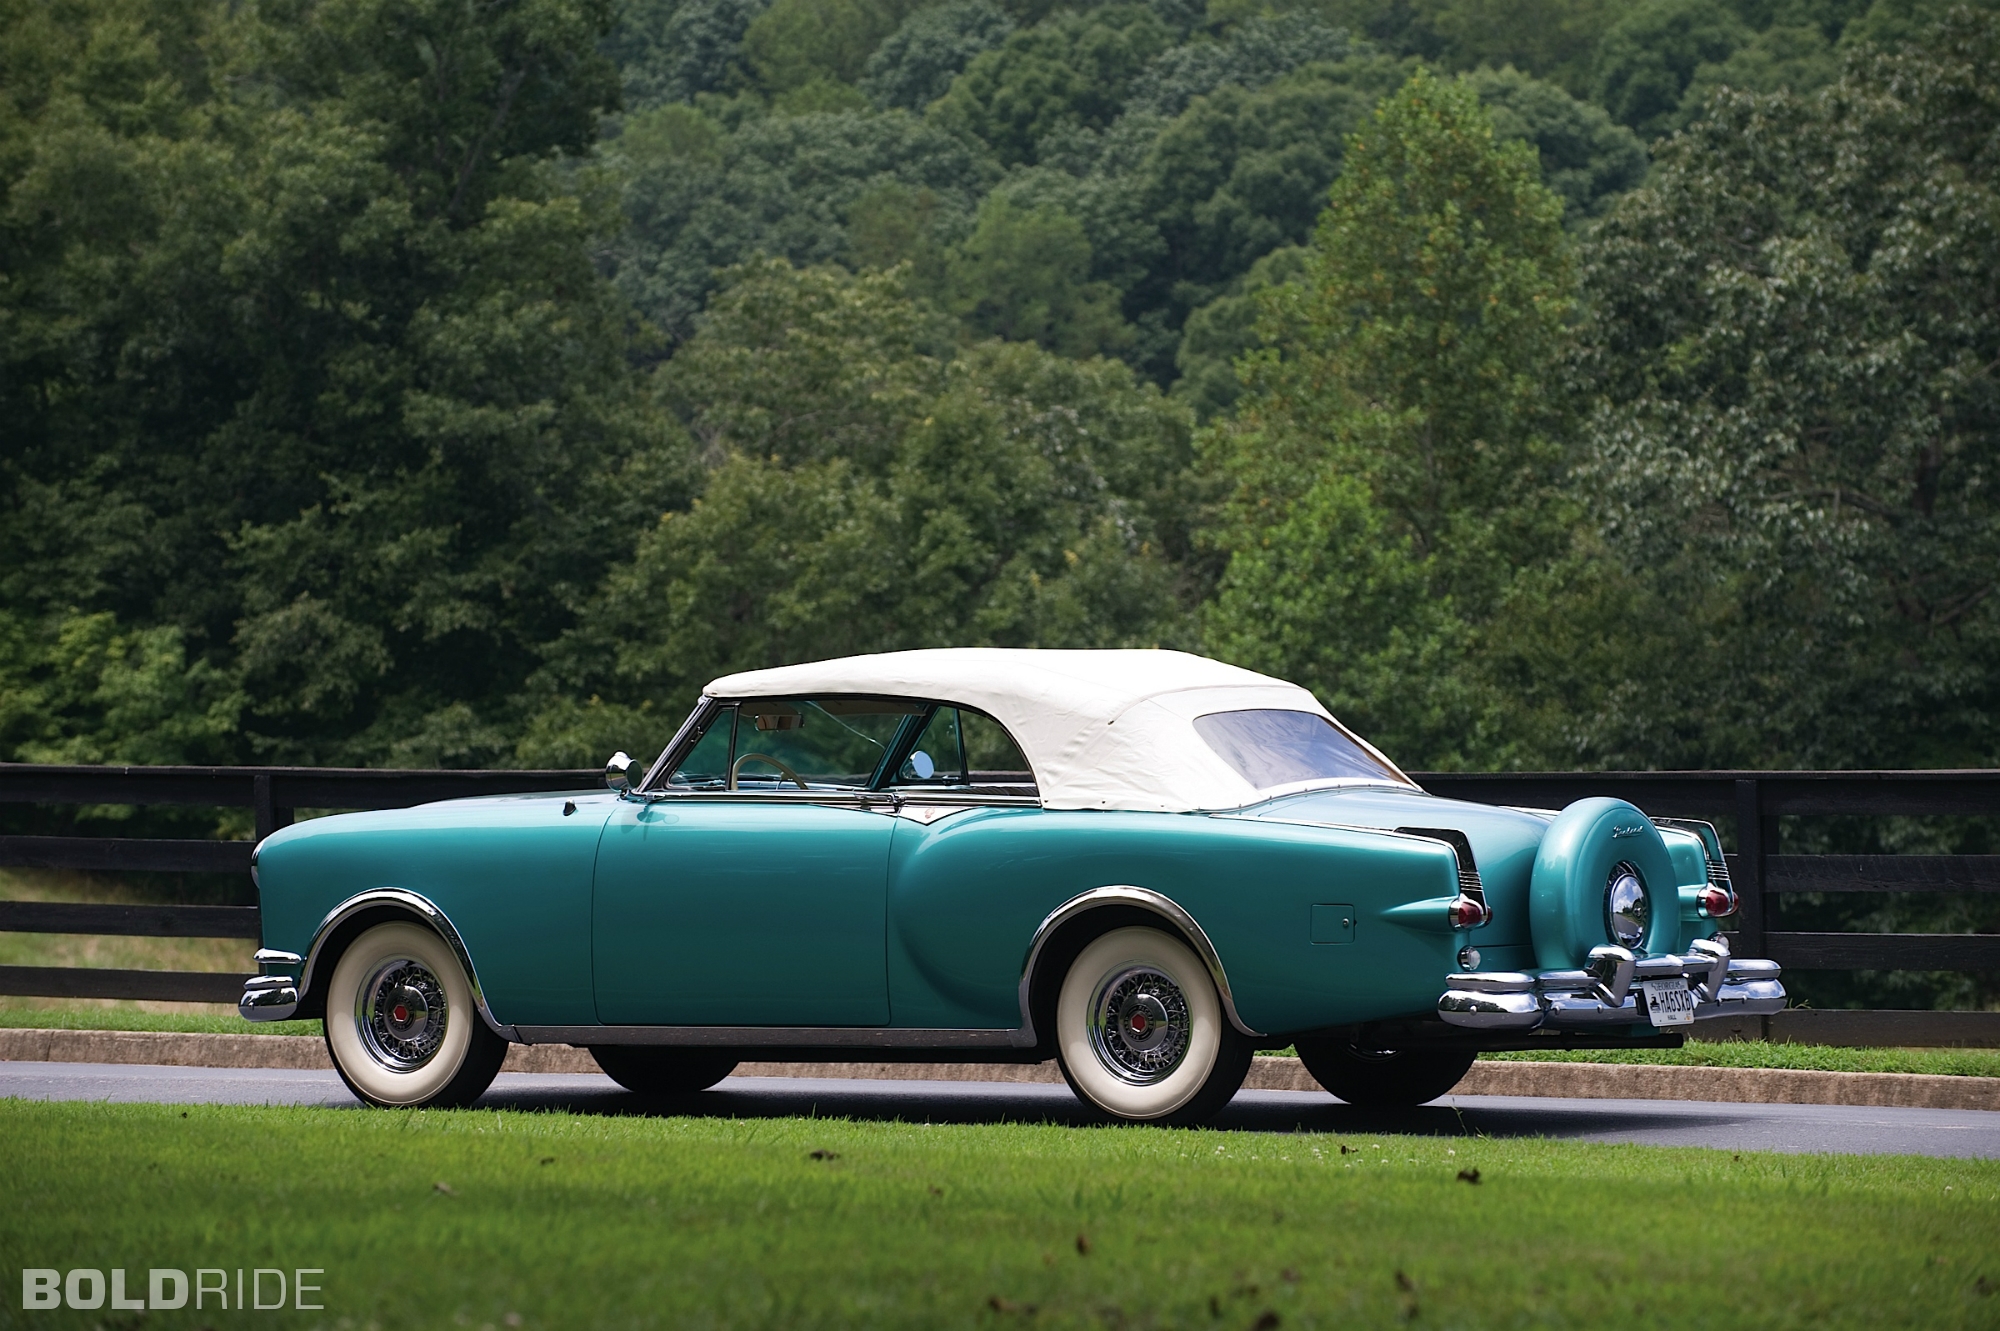 1953 Packard Caribbean Convertible Boldride.com - Pictures, Wallpapers